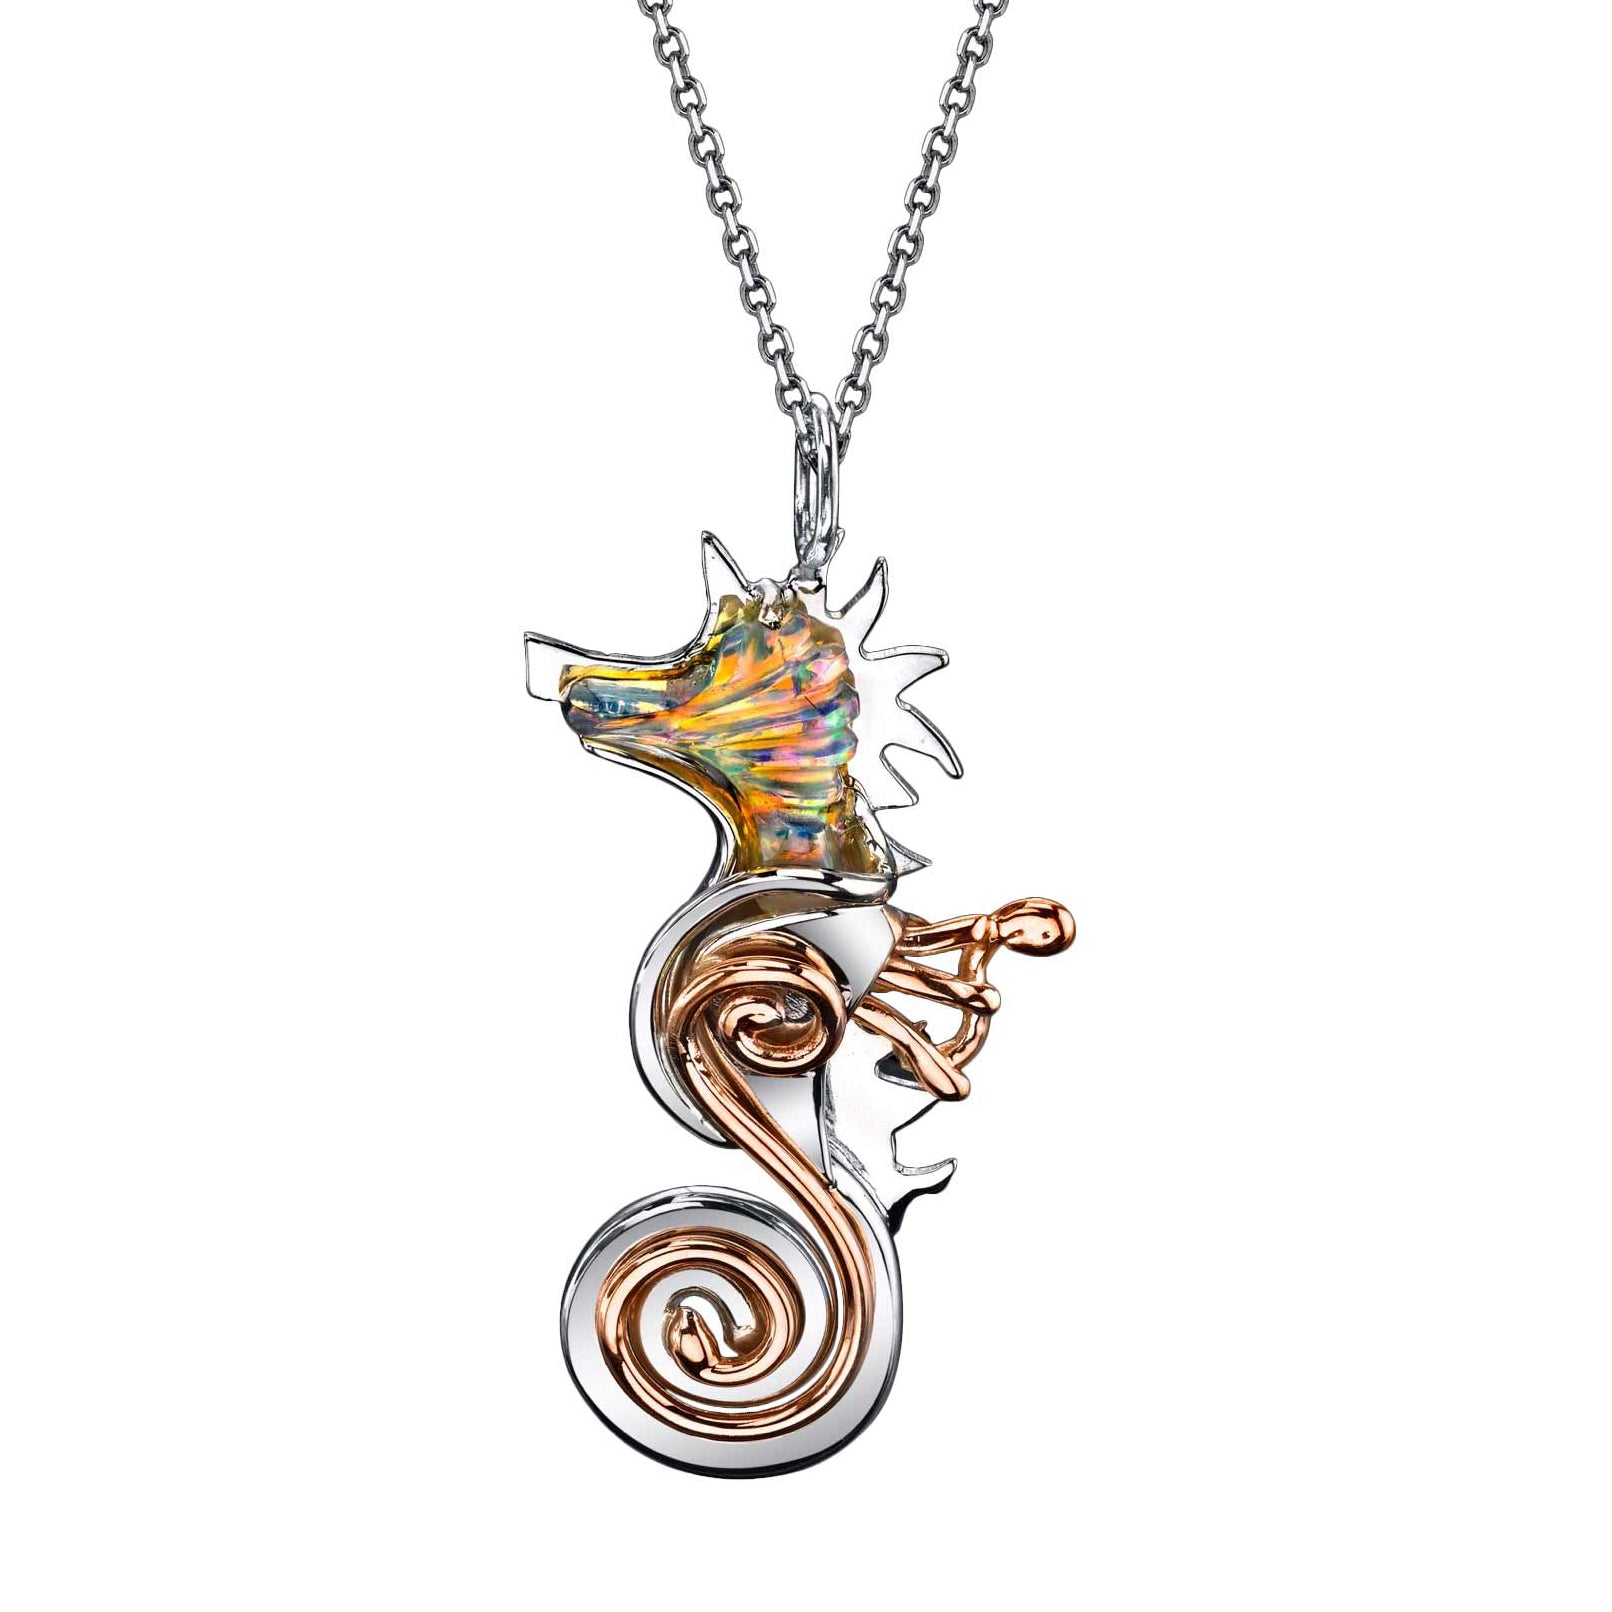 Buy Tiny Gold Seahorse Necklace Online in India - Etsy